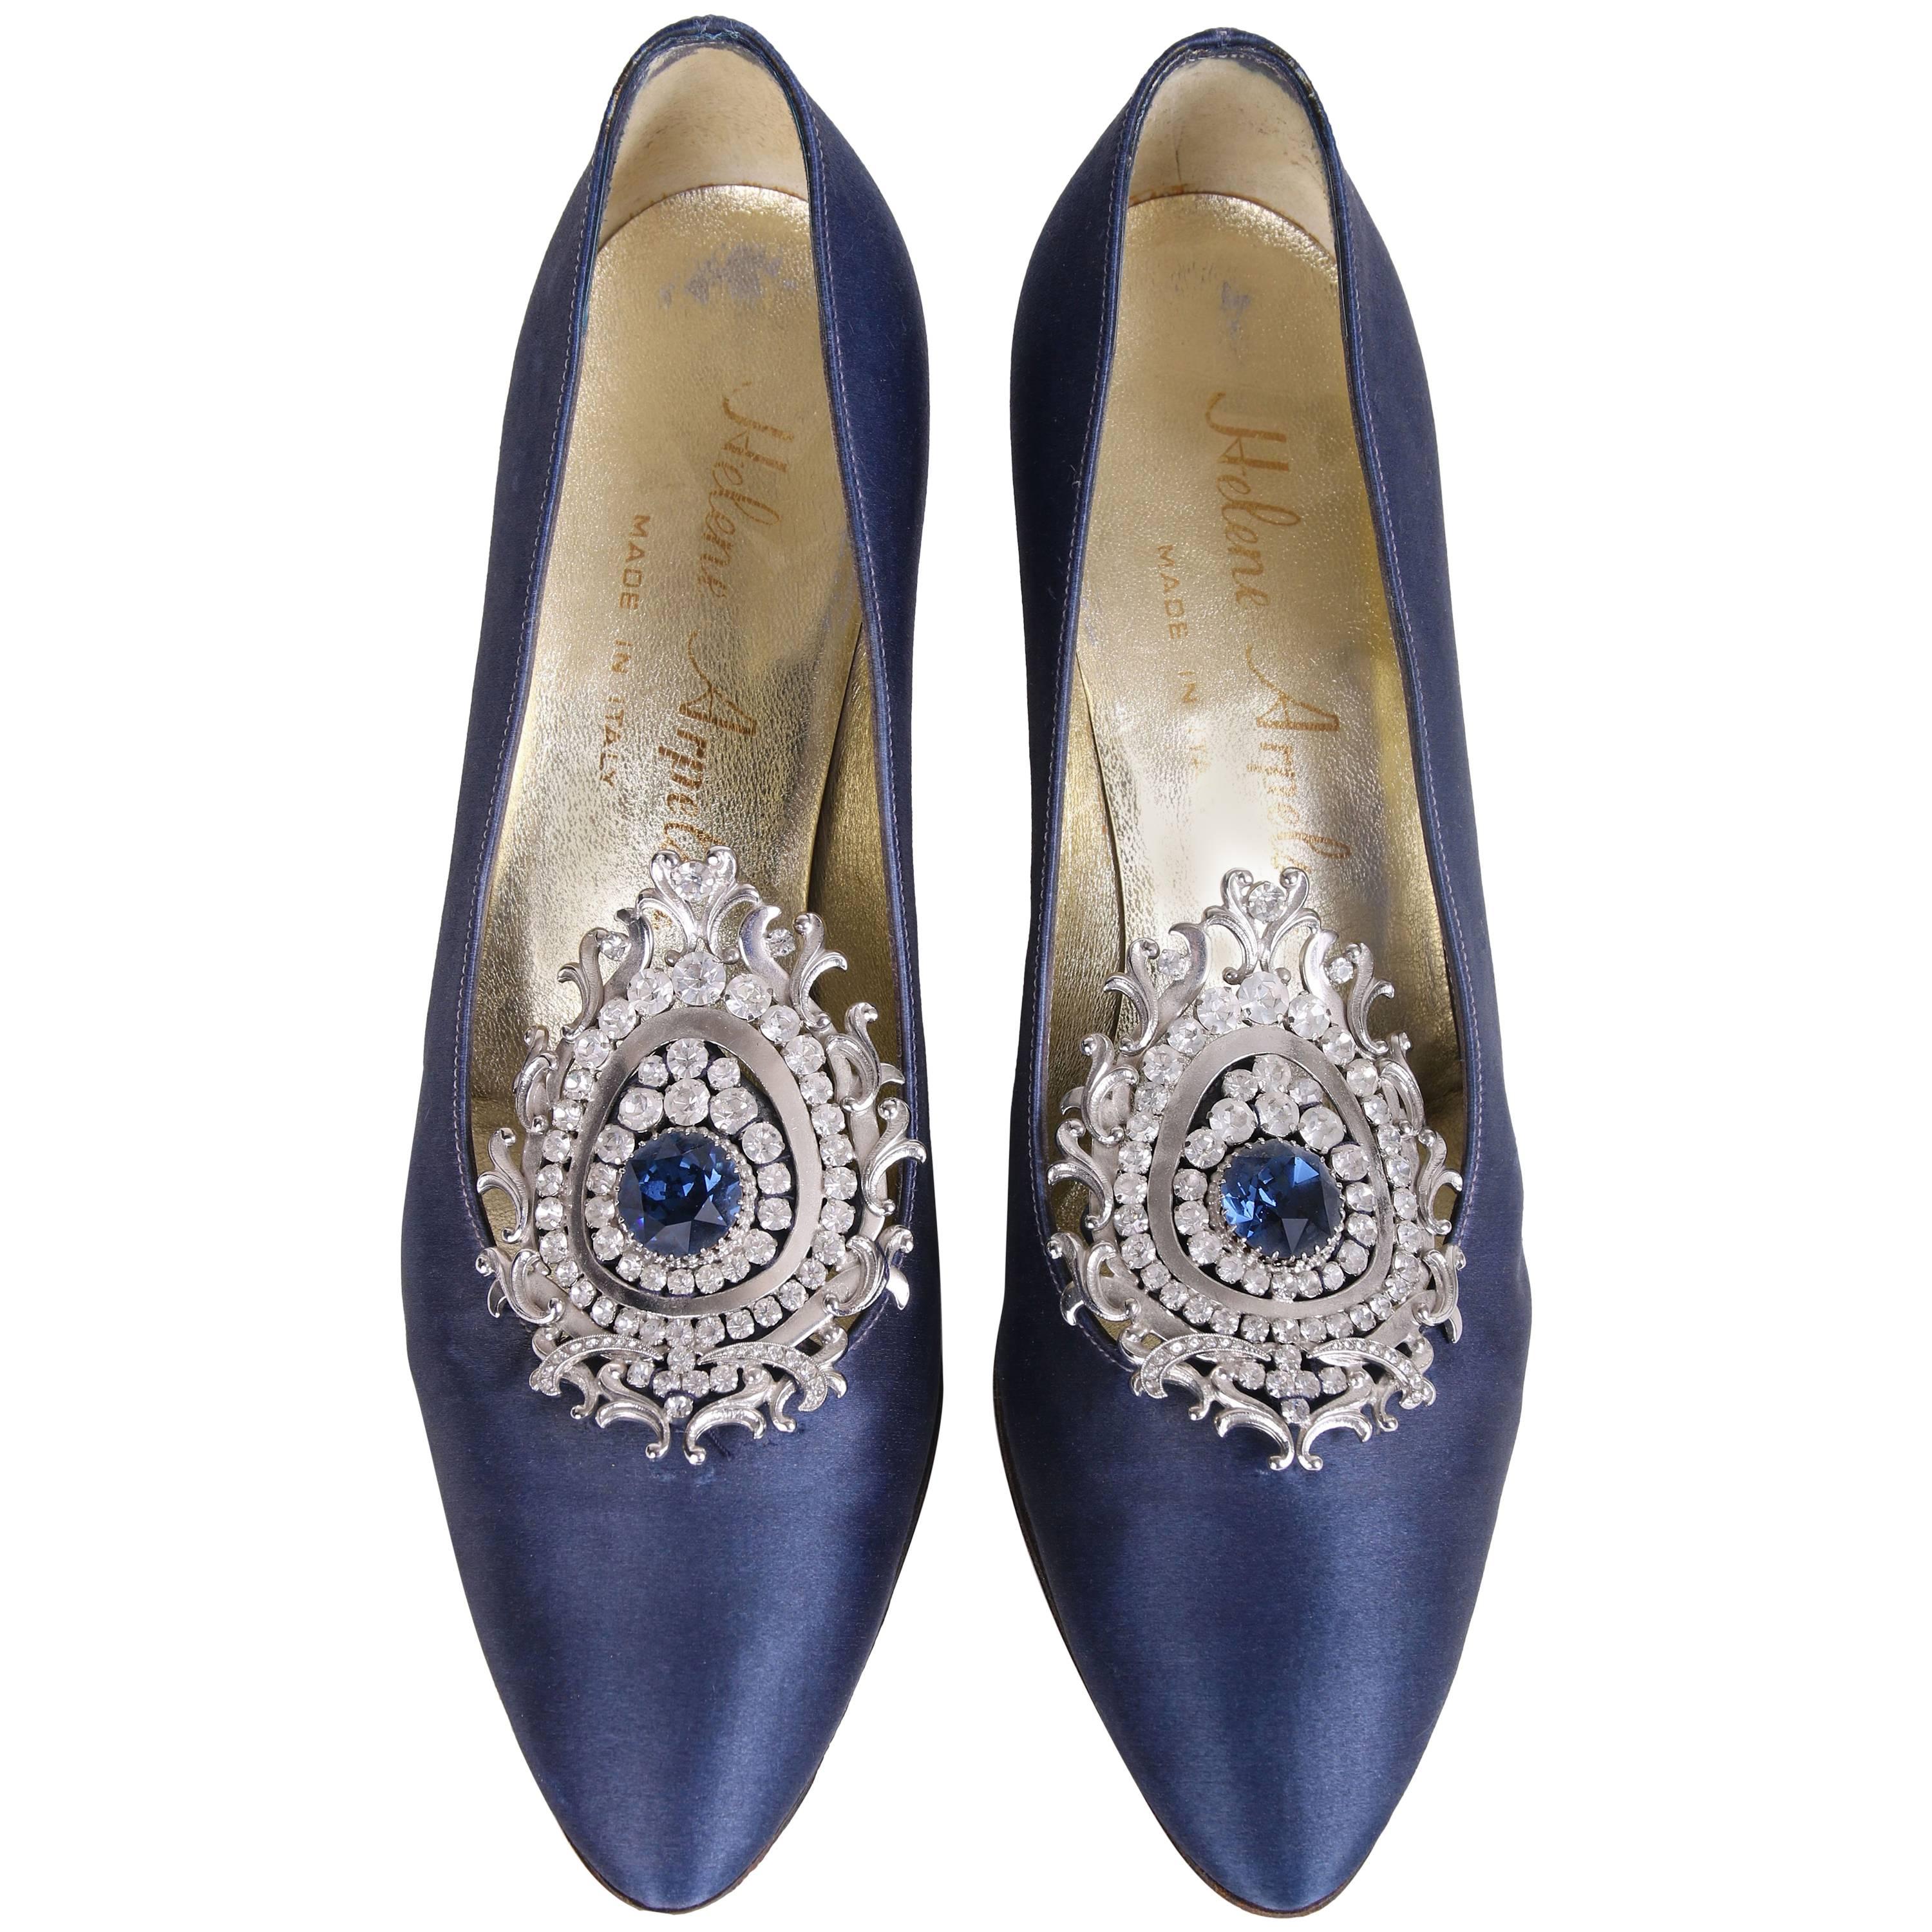 Helene Arpels Custom Blue Silk Pumps with Jeweled Adornment at Toe